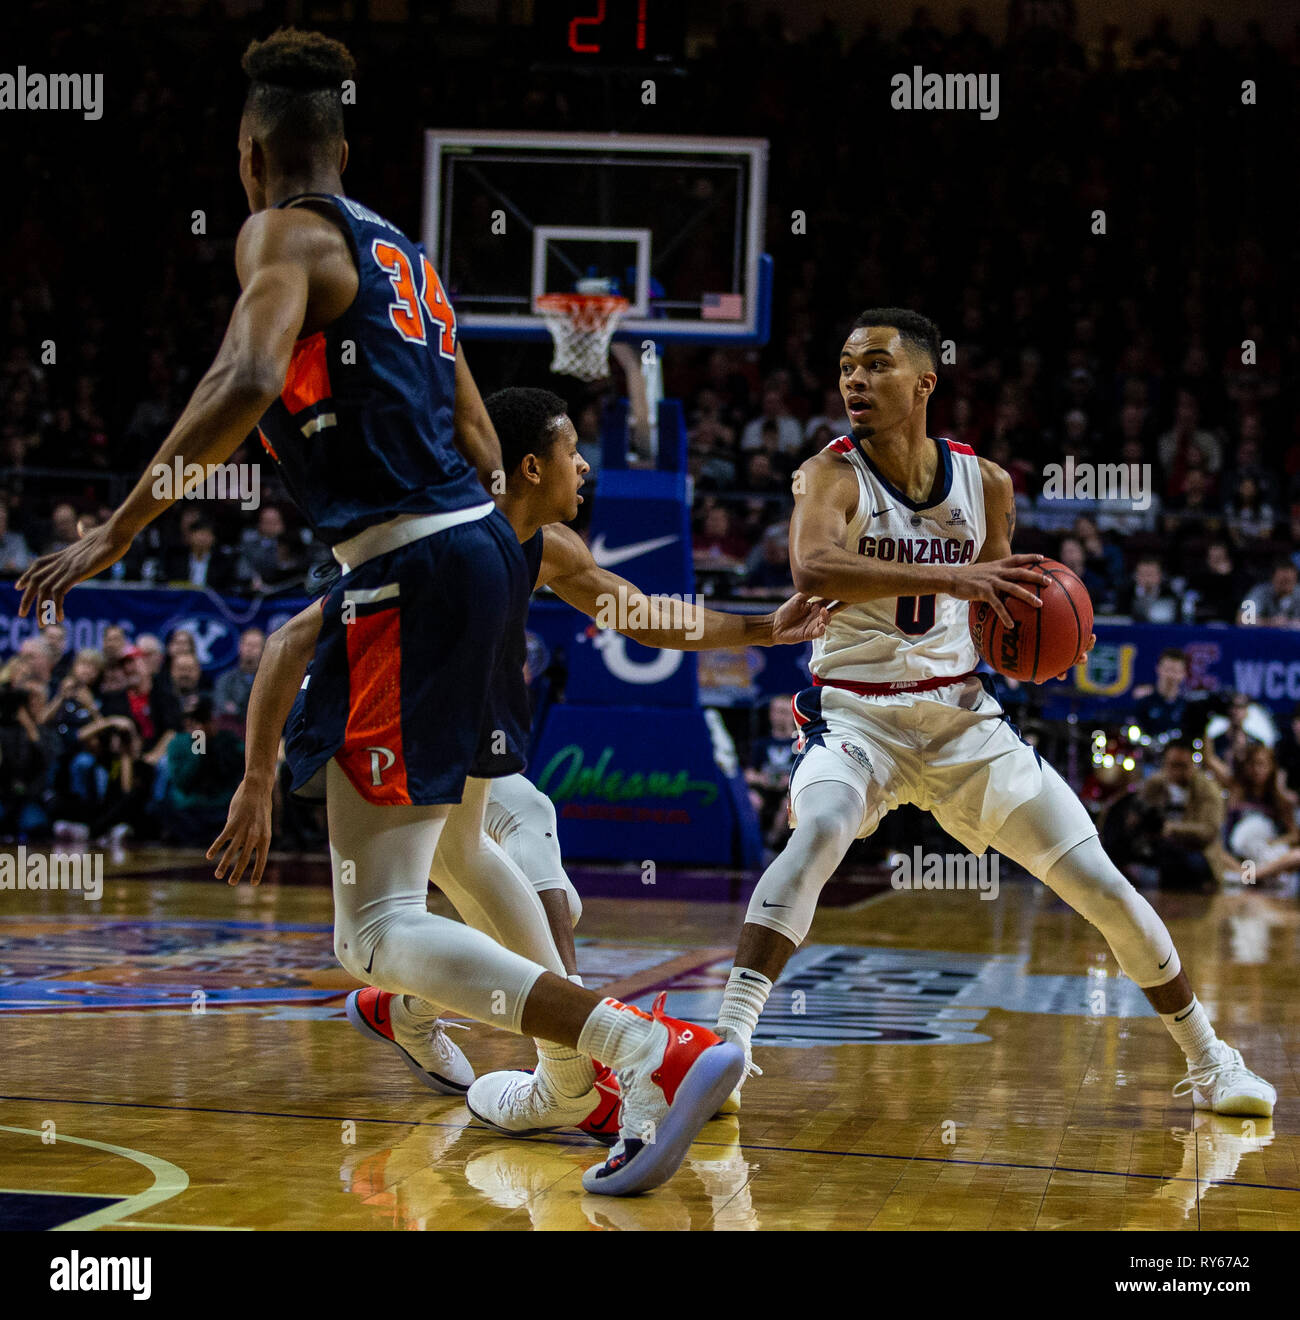 Mar 11 2019 Las Vegas, NV, U.S.A. Gonzaga guard Geno Crandall (0) looks to pass the ball during the NCAA West Coast Conference Men's Basketball Tournament semi -final between the Pepperdine Wave and the Gonzaga Bulldogs 100-74 win at Orleans Arena Las Vegas, NV. Thurman James/CSM Stock Photo